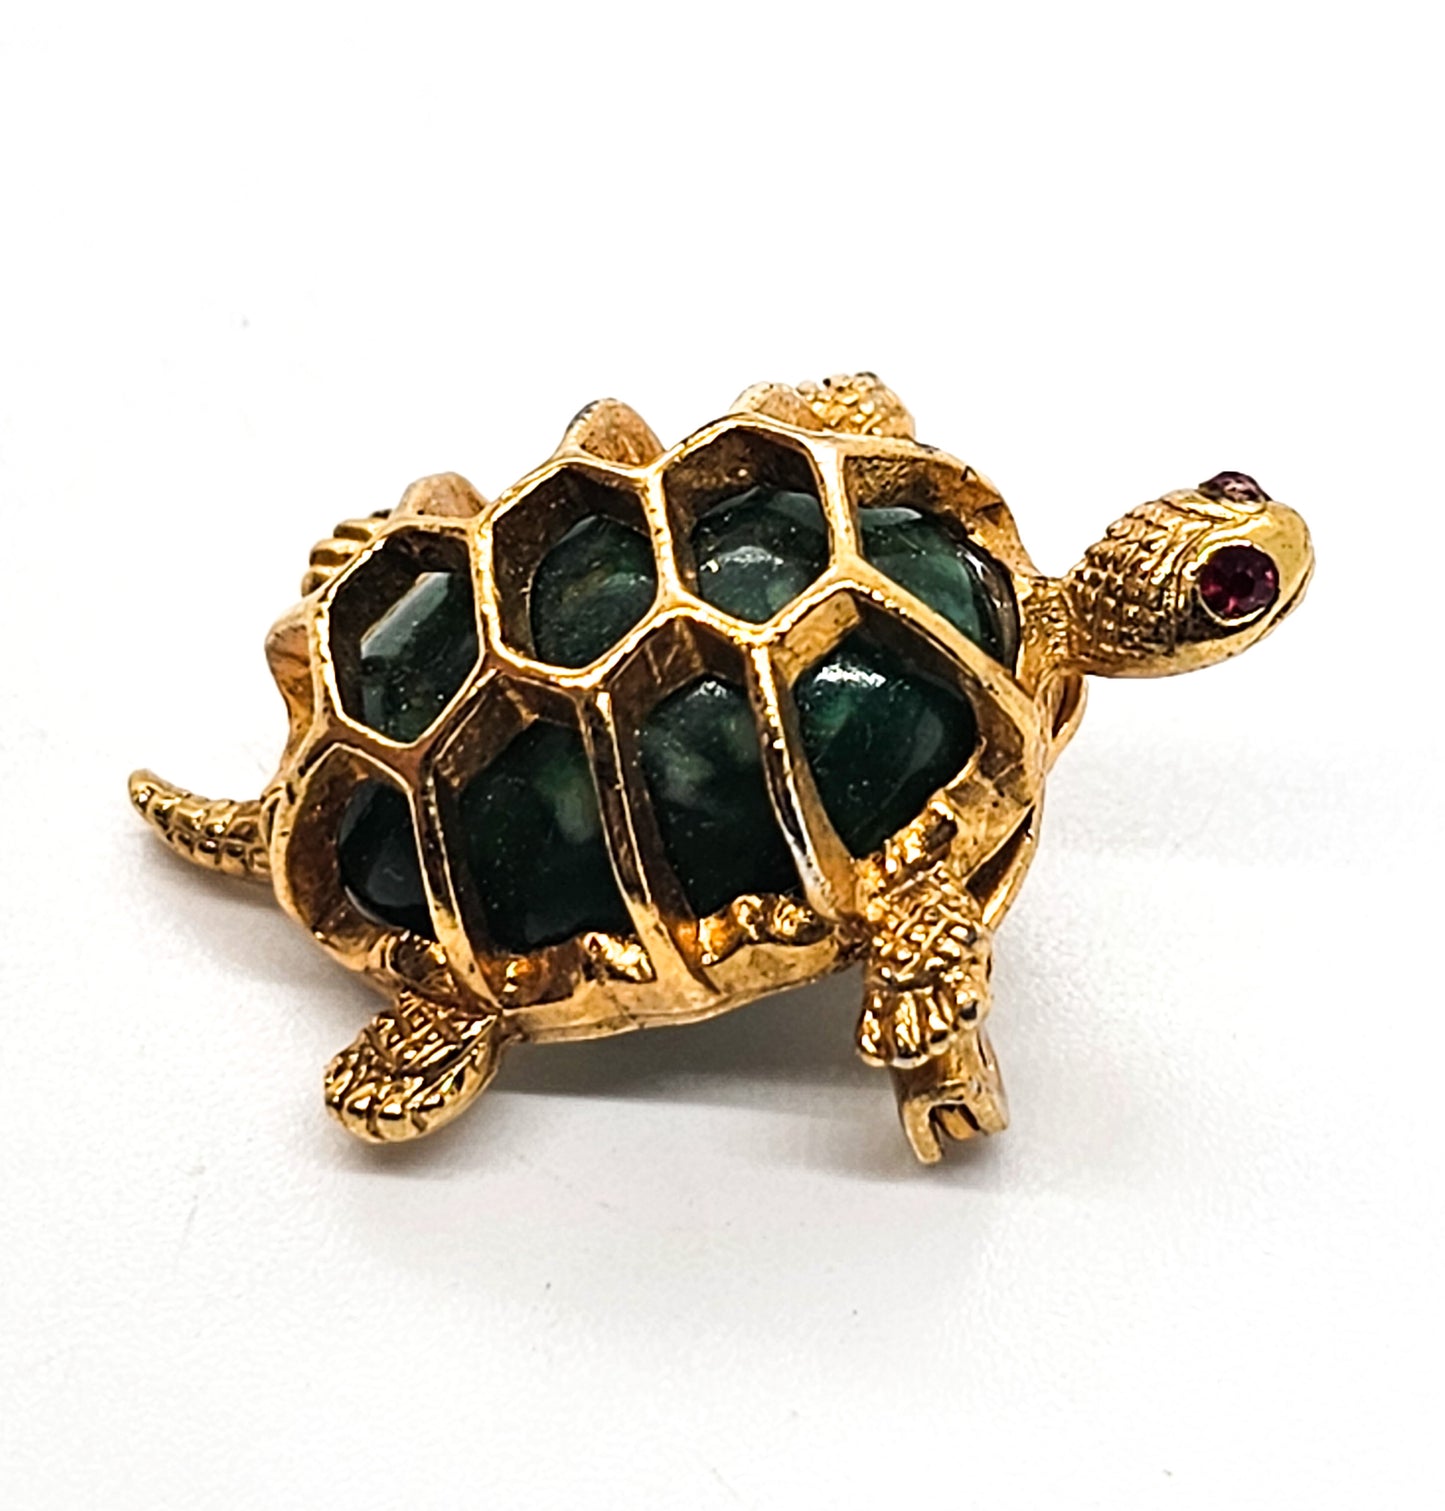 Turtle green lucite and gold toned vintage reptile brooch with red rhinestone eyes